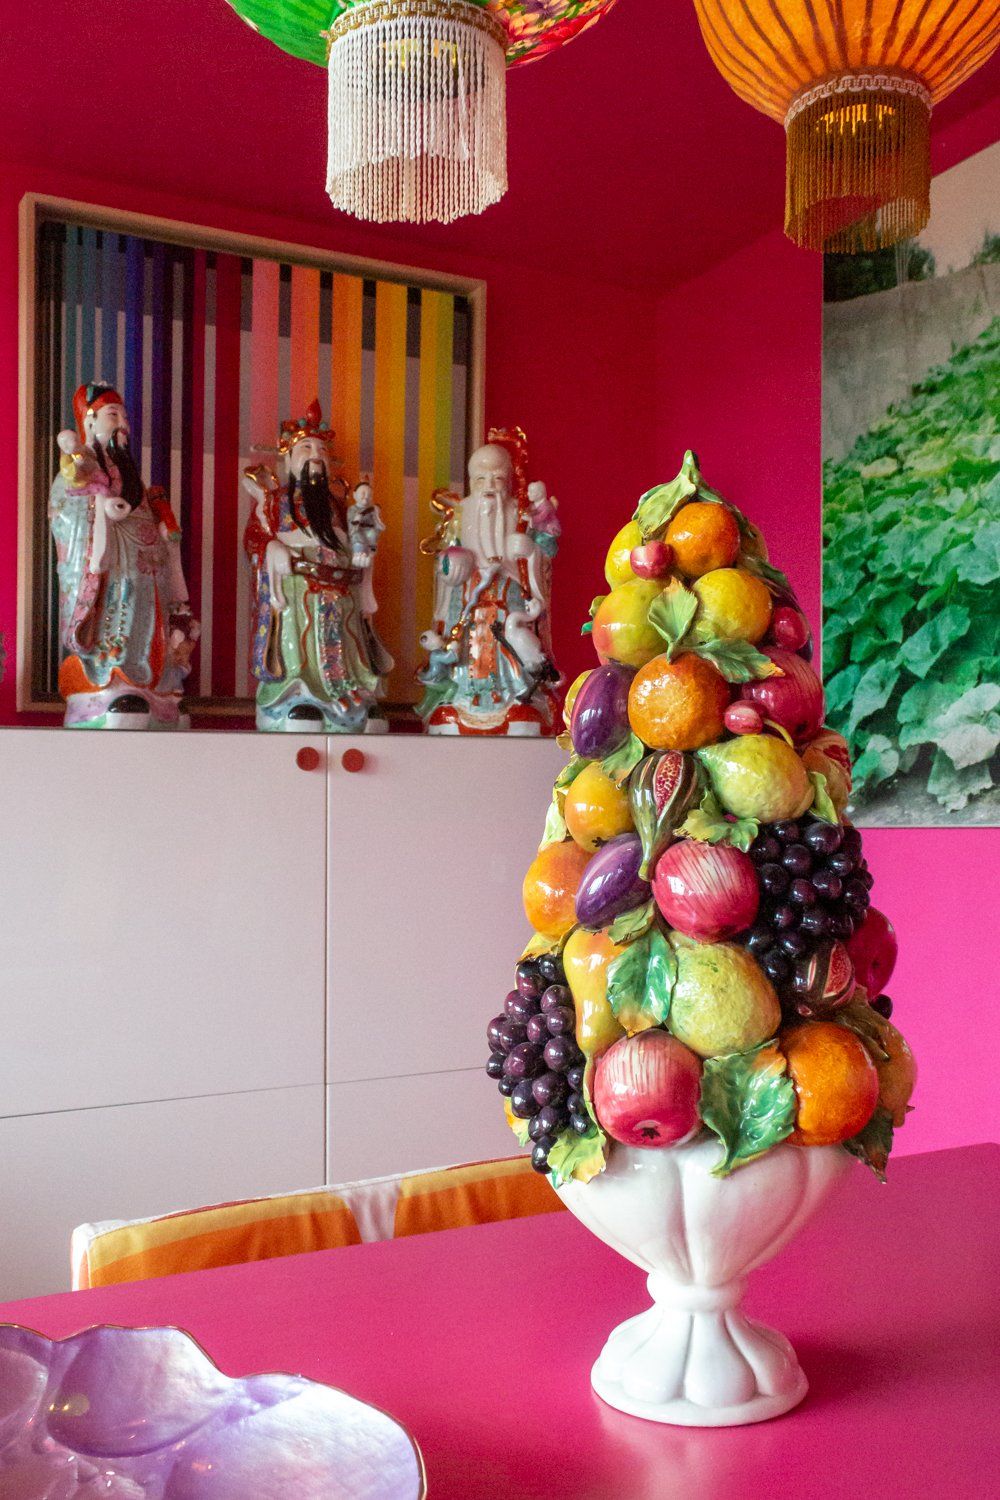 Swoon! The Ceramic Fruit Topiary is *hot*